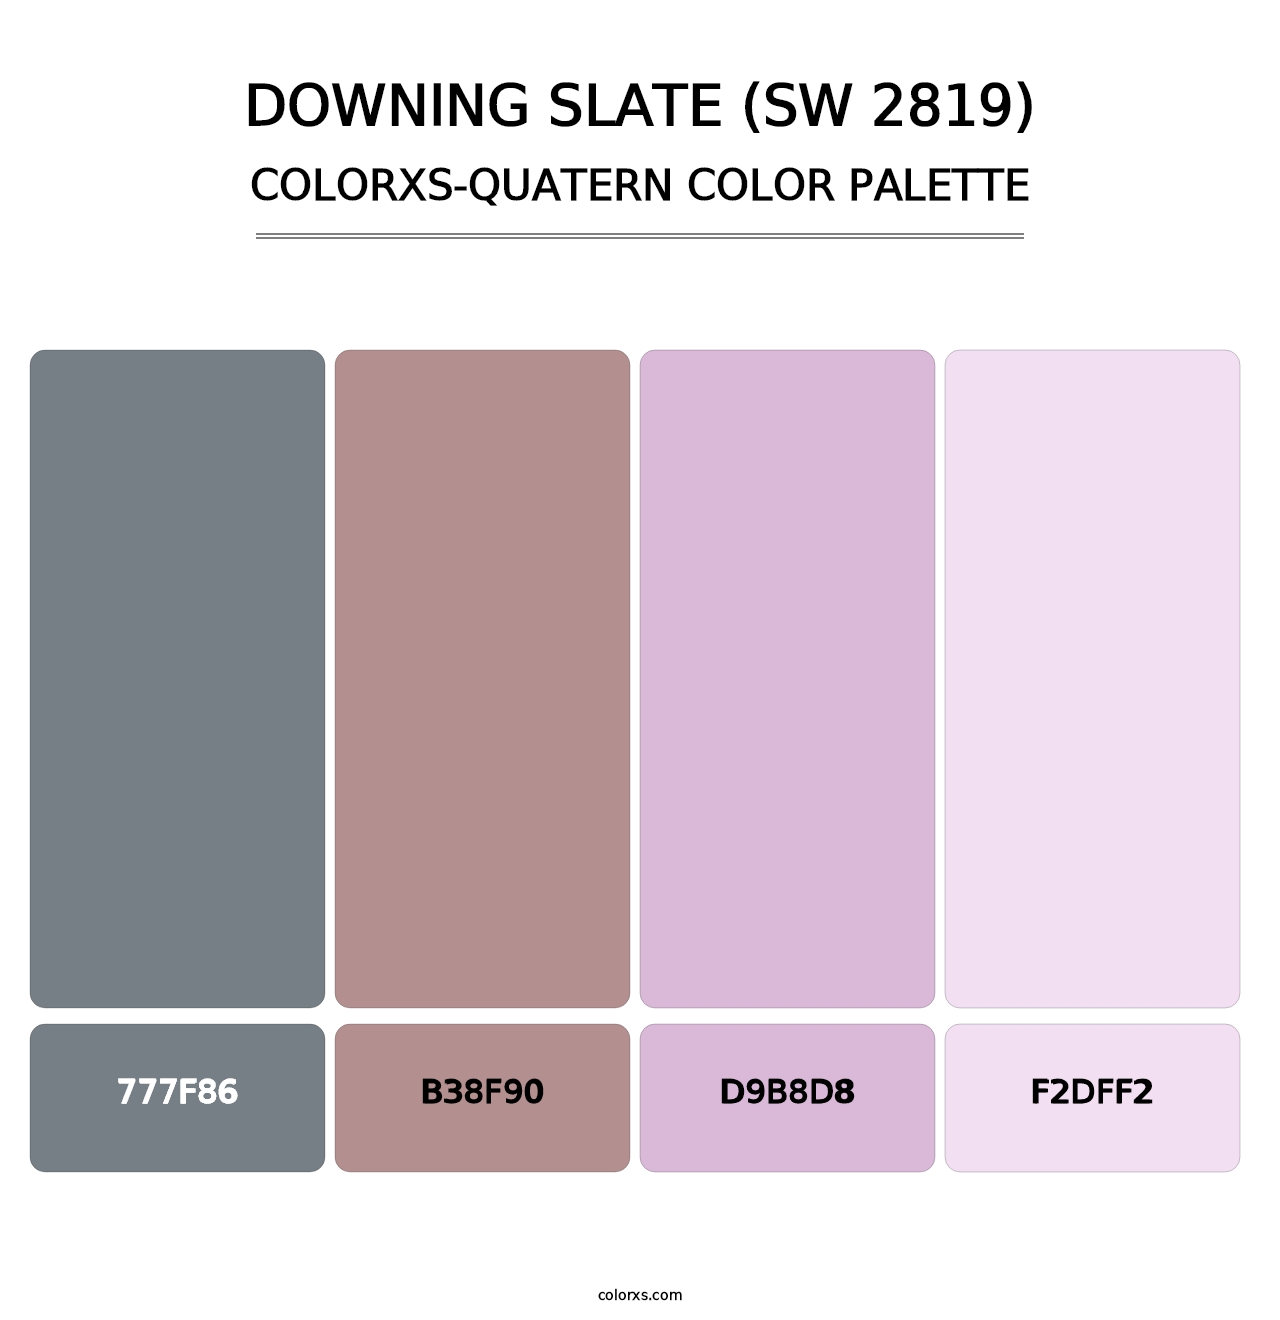 Downing Slate (SW 2819) - Colorxs Quatern Palette